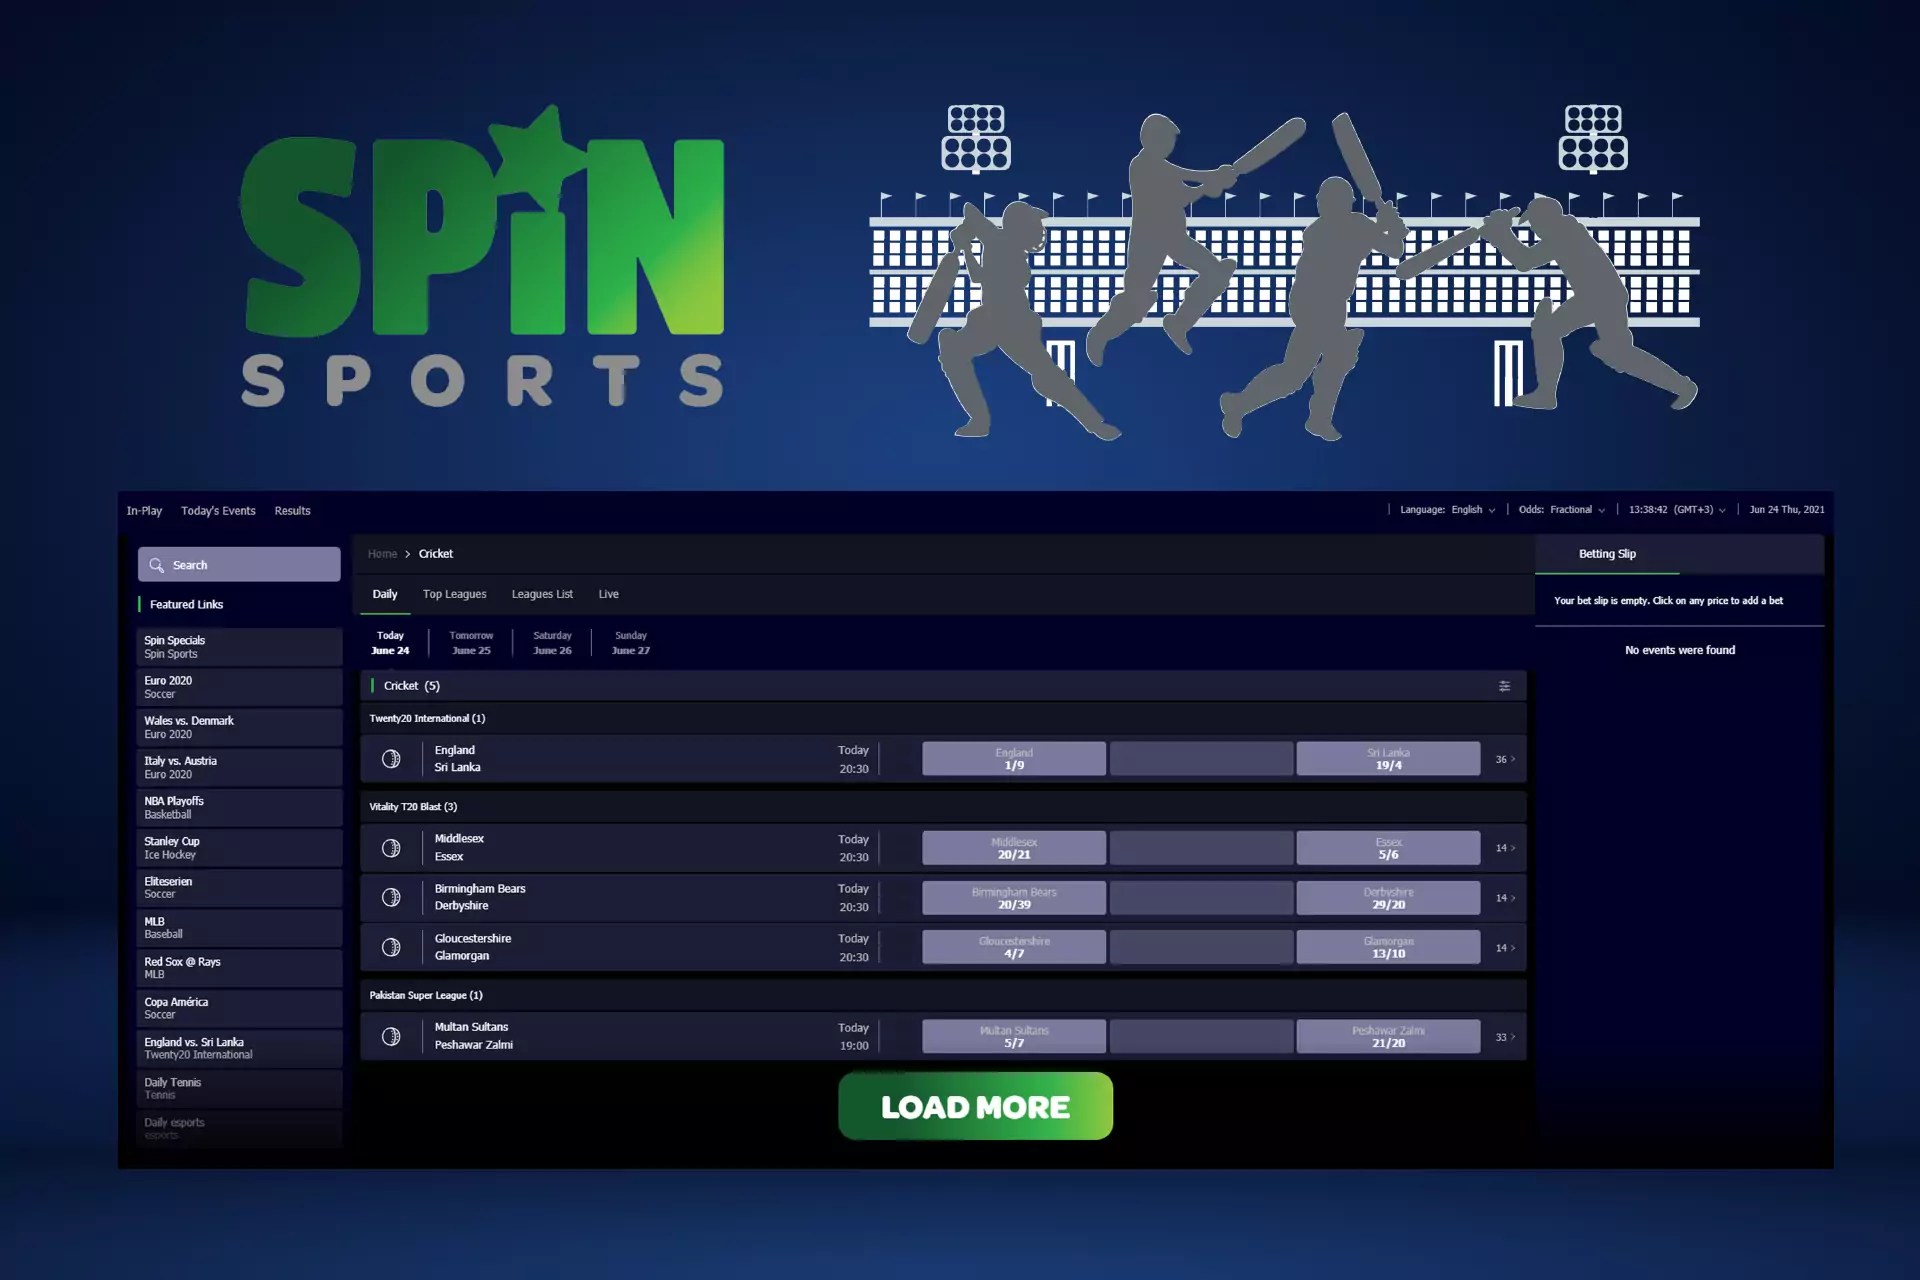 If you are a cricket fan, place bets on your favorite team on Spins Sports.